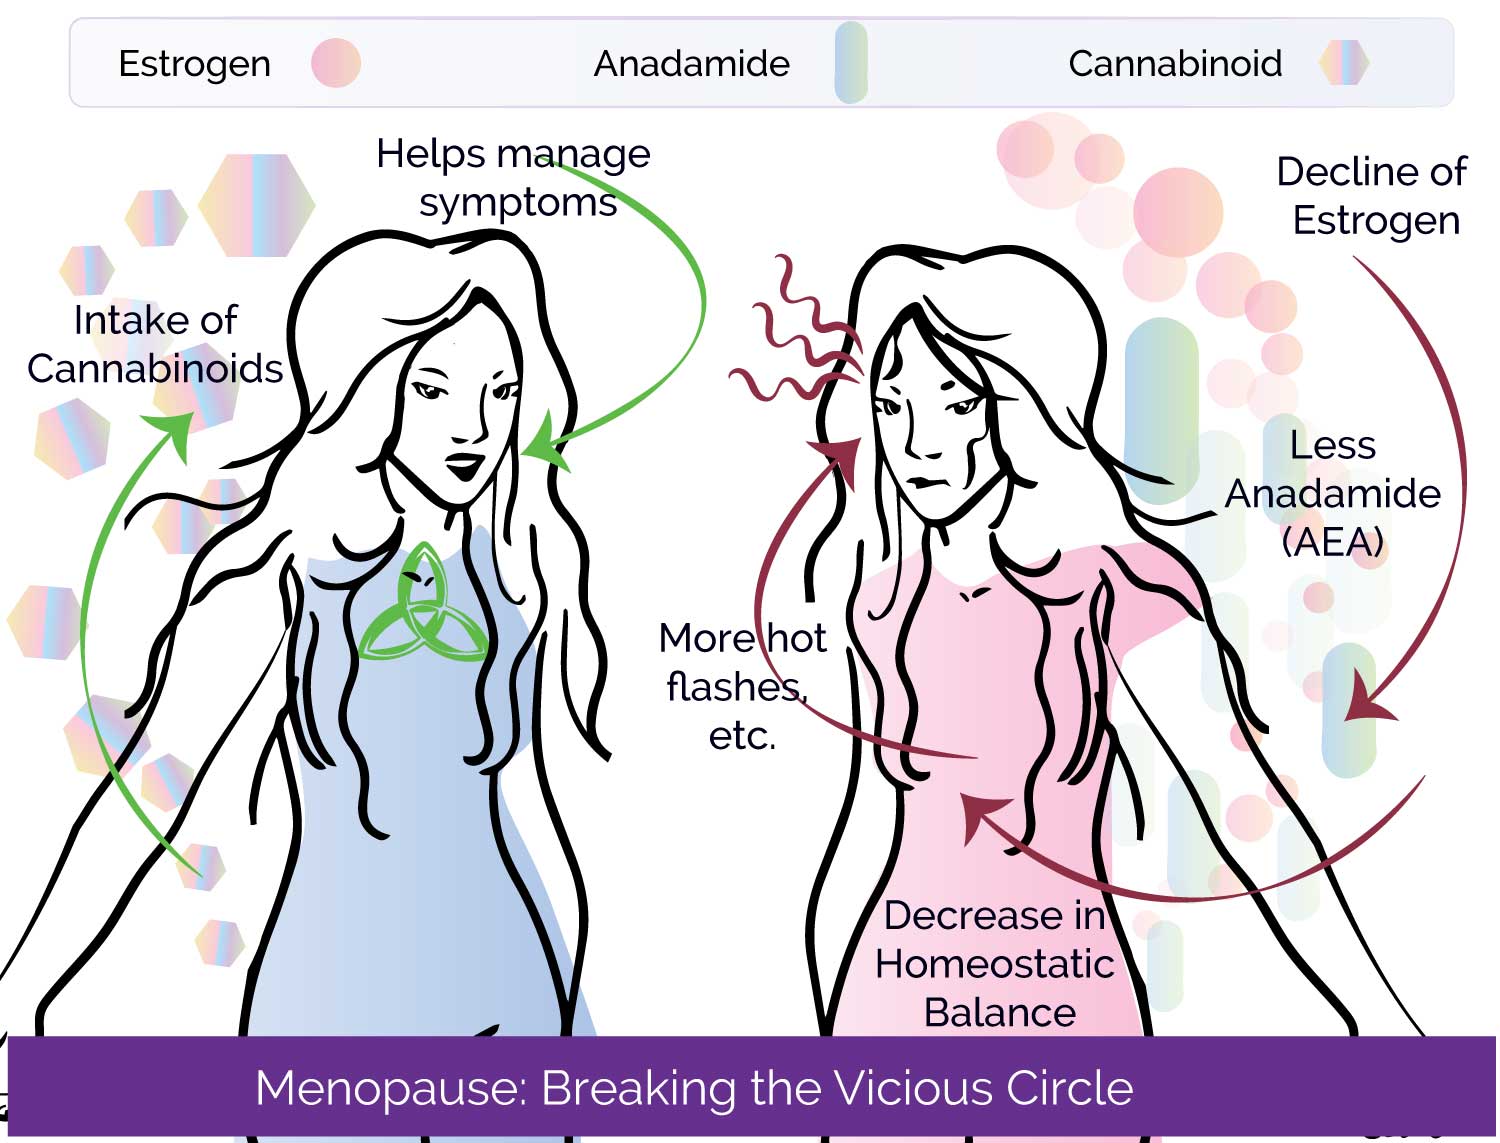 Diagram the demonstrates the cycle: decline in estrogen, less anadamide, less homestasis, more hot flashes compared balance that can be achieved when cannabinoids are taken.